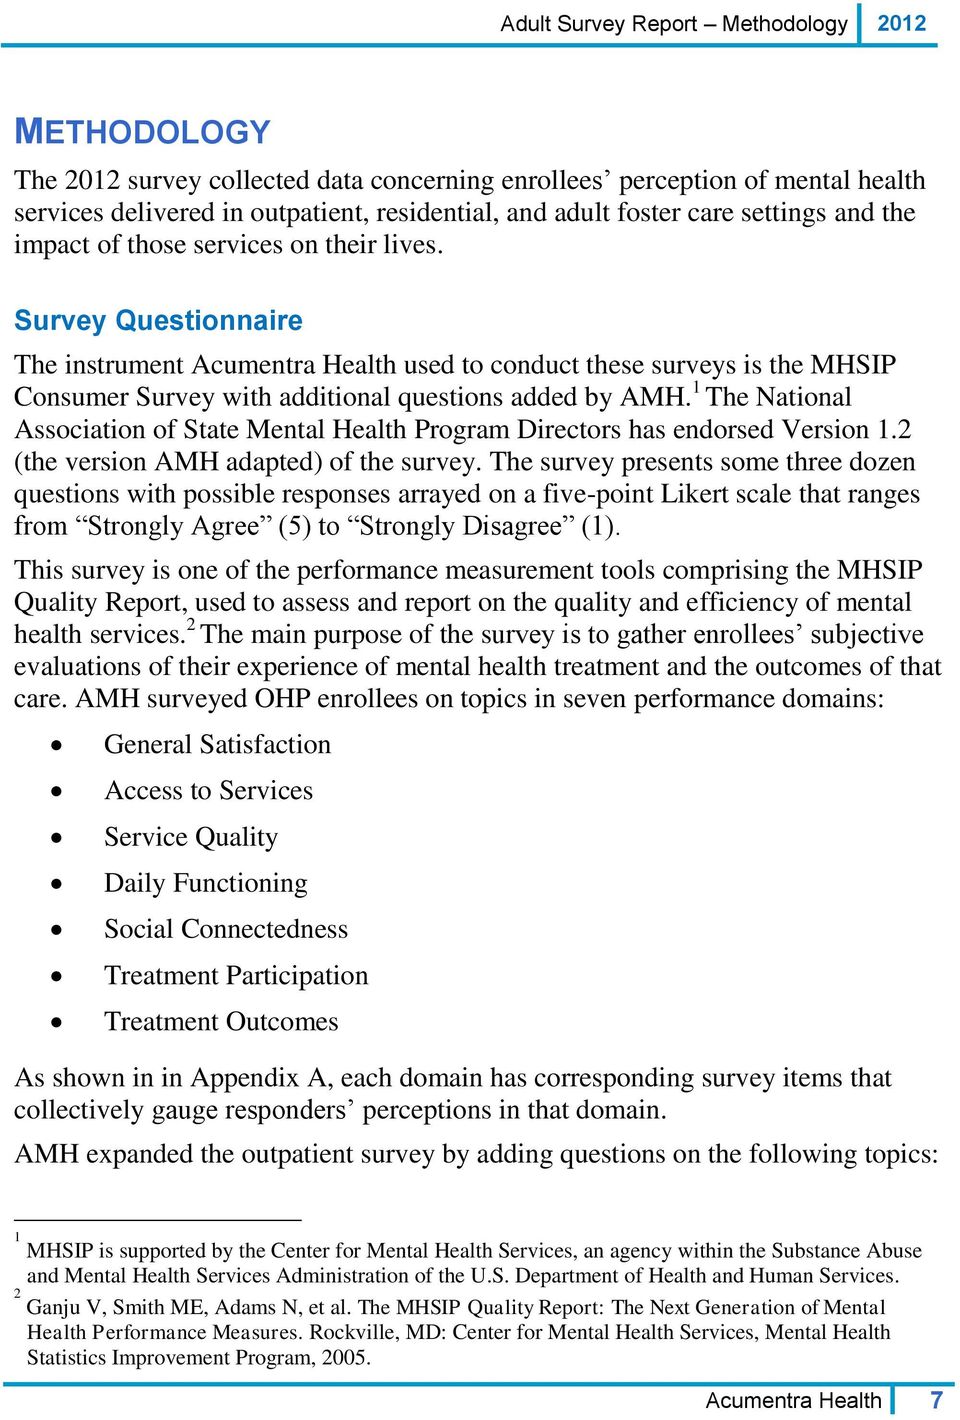 Survey Questionnaire The instrument Acumentra Health used to conduct these surveys is the MHSIP Consumer Survey with additional questions added by AMH.